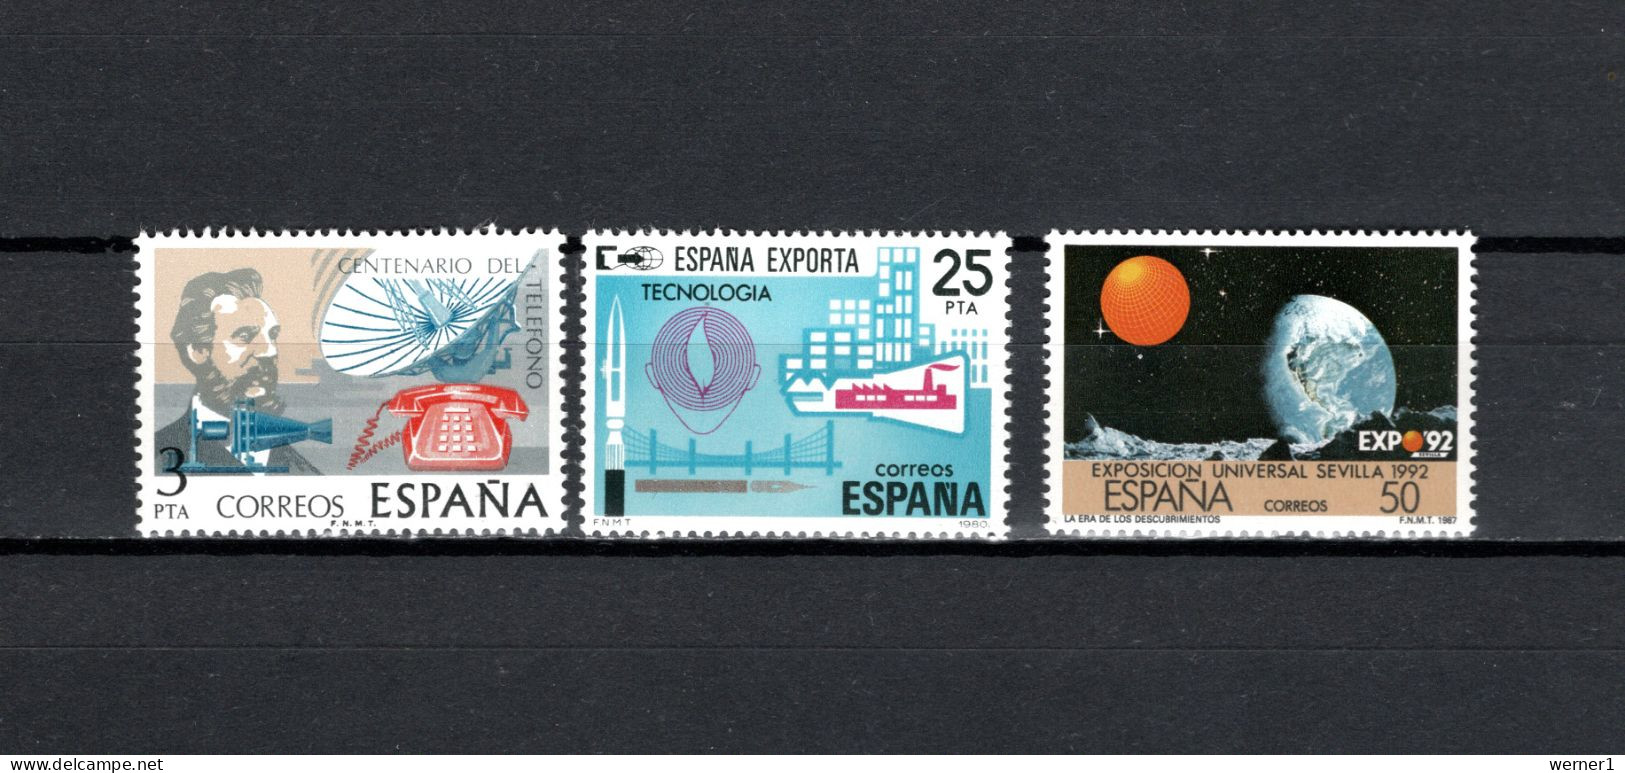 Spain 1976/1987 Space, Telephone Centenary, Technology, Expo Sevilla 3 Stamps MNH - Europe